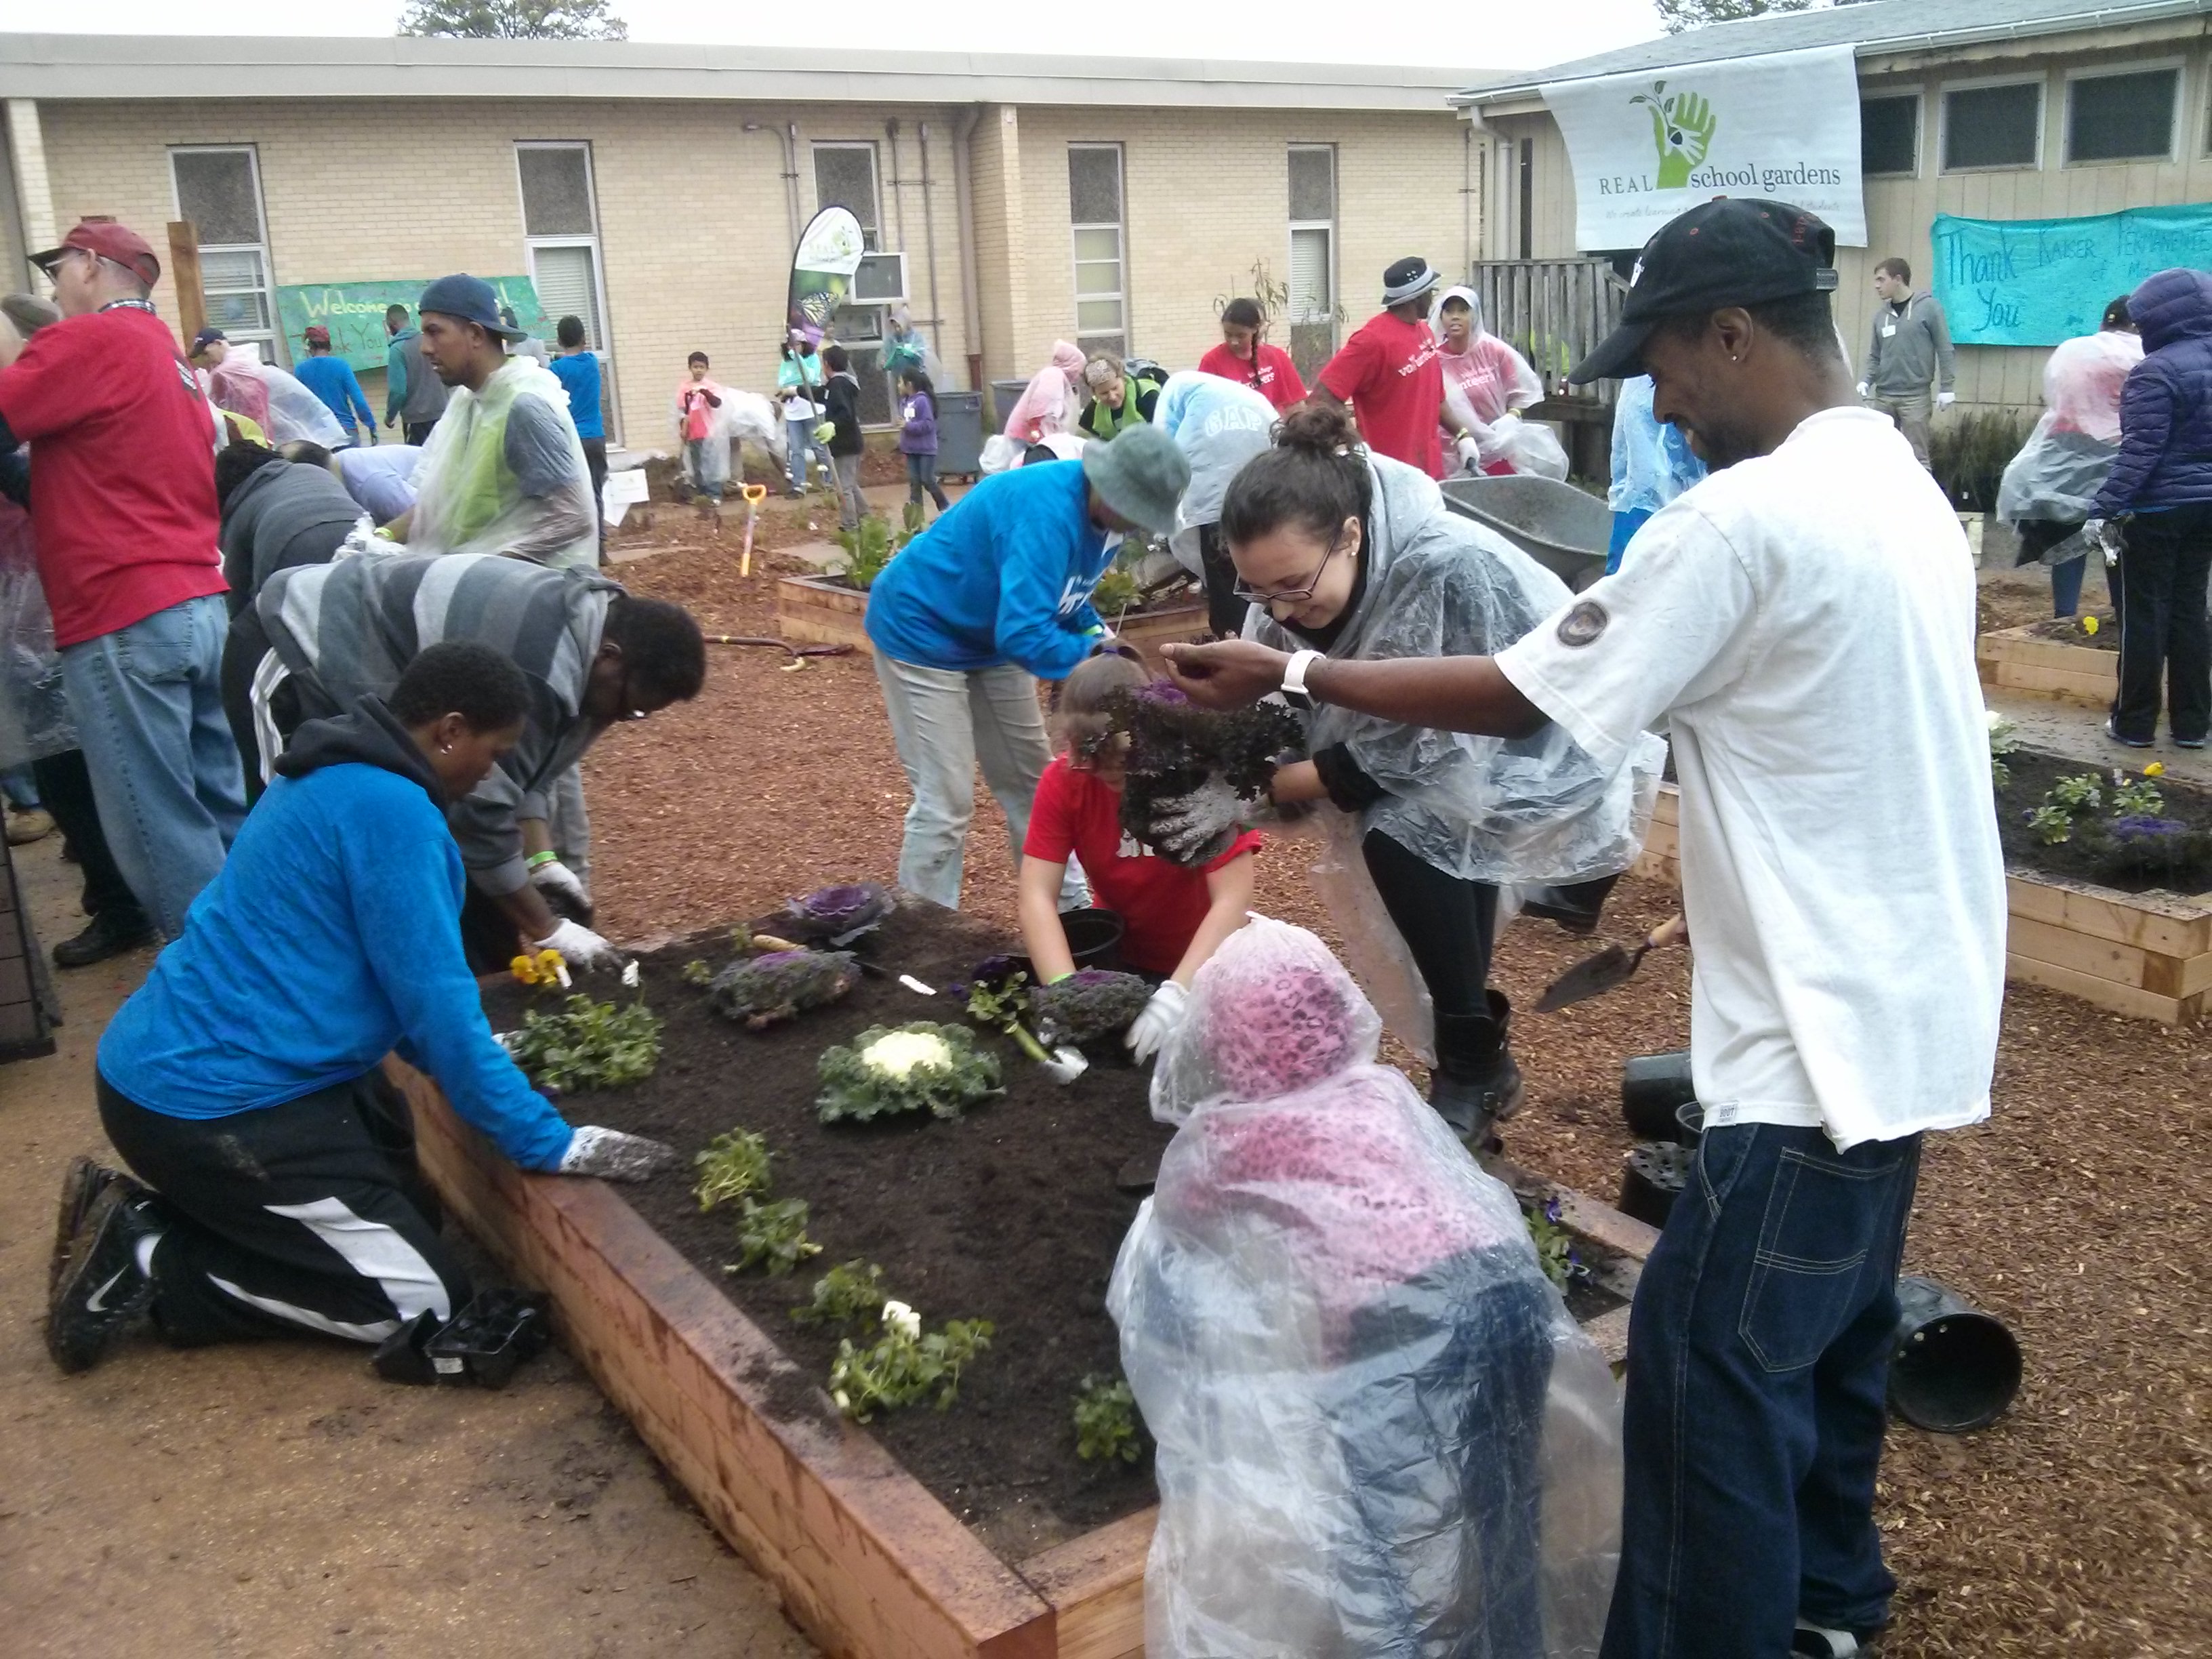 Growing vegetables and test scores: Local schools dig learning gardens